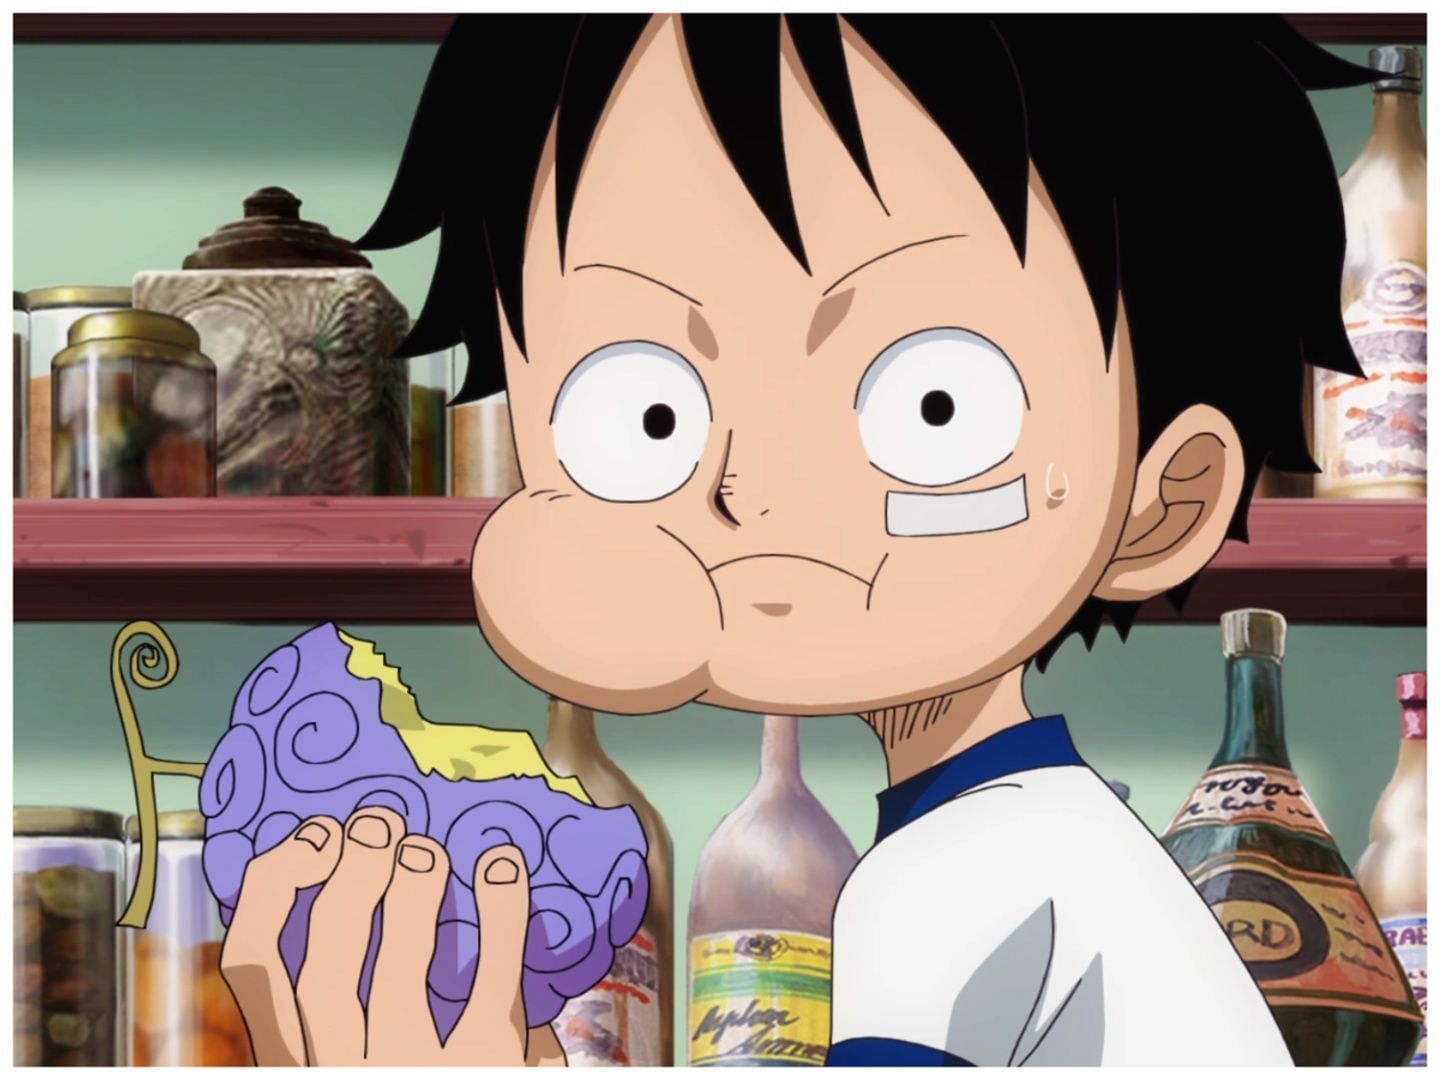 Gum-Gum fruit from One Piece is also known as the devil fruit. (Image via Toei Animation Studio)